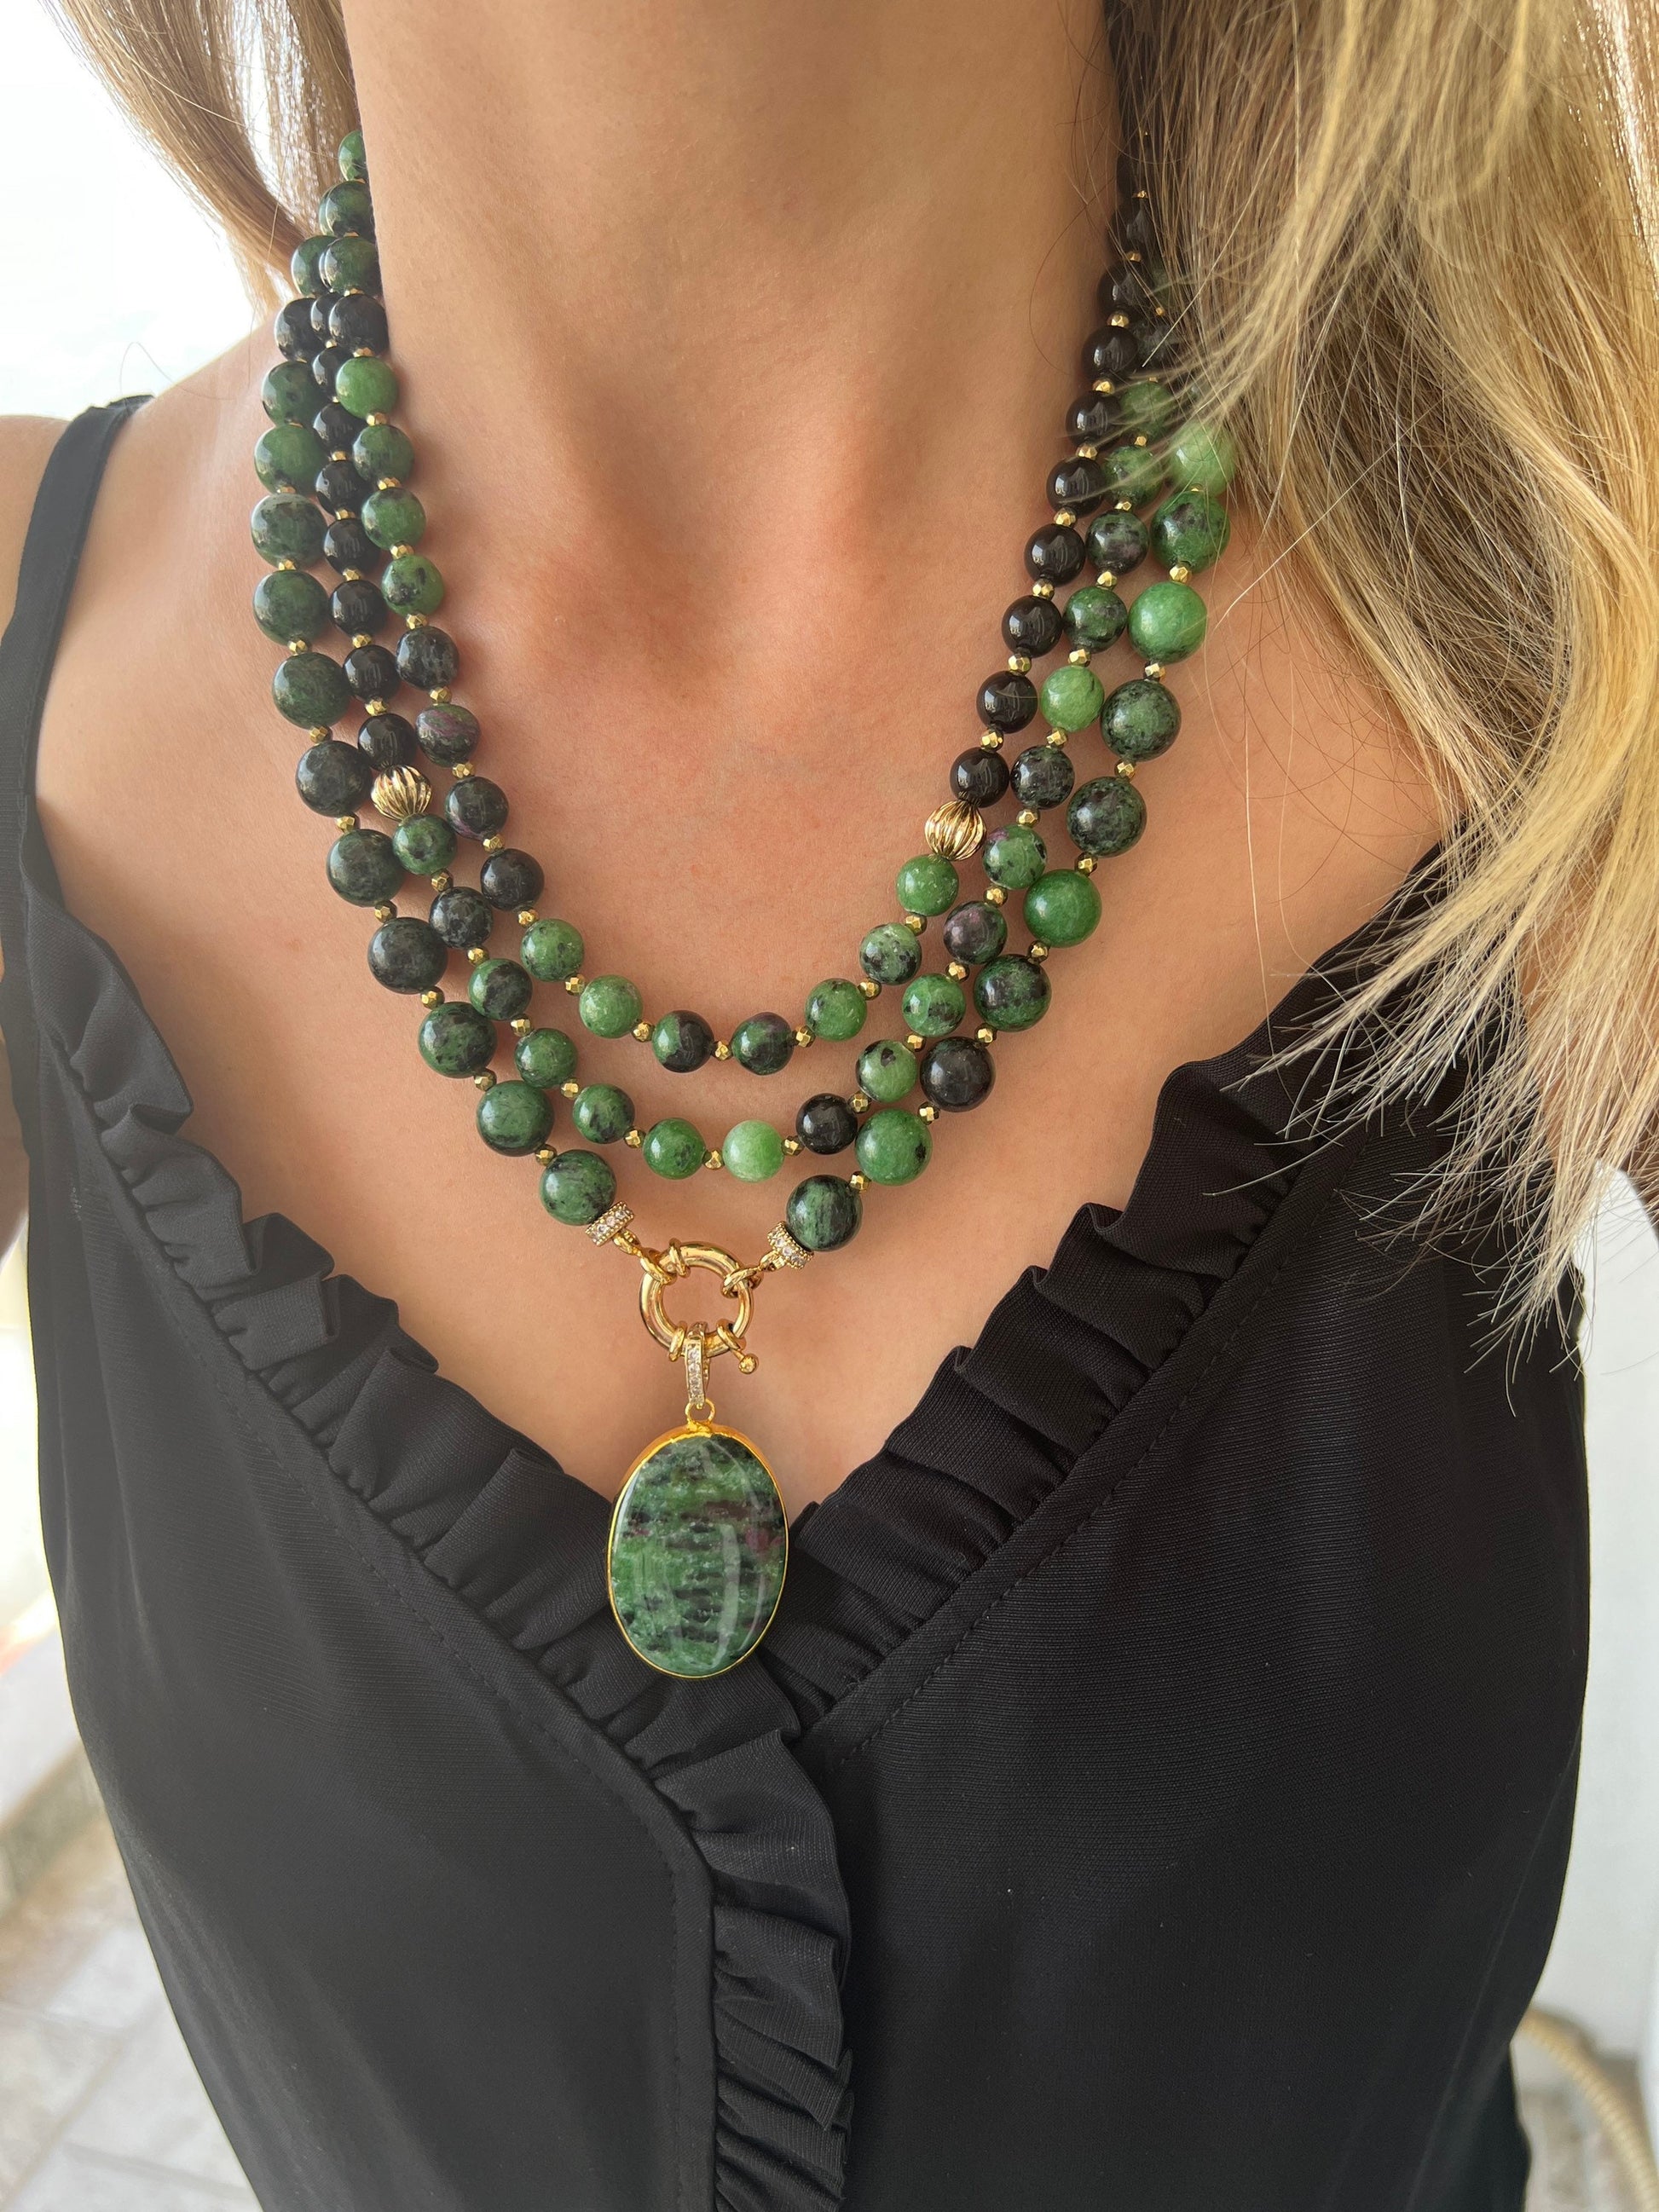 Ruby Zoisite Necklace, Green Gemstone Jewelry, Crystal Jewelry, Statement Necklace, Gift